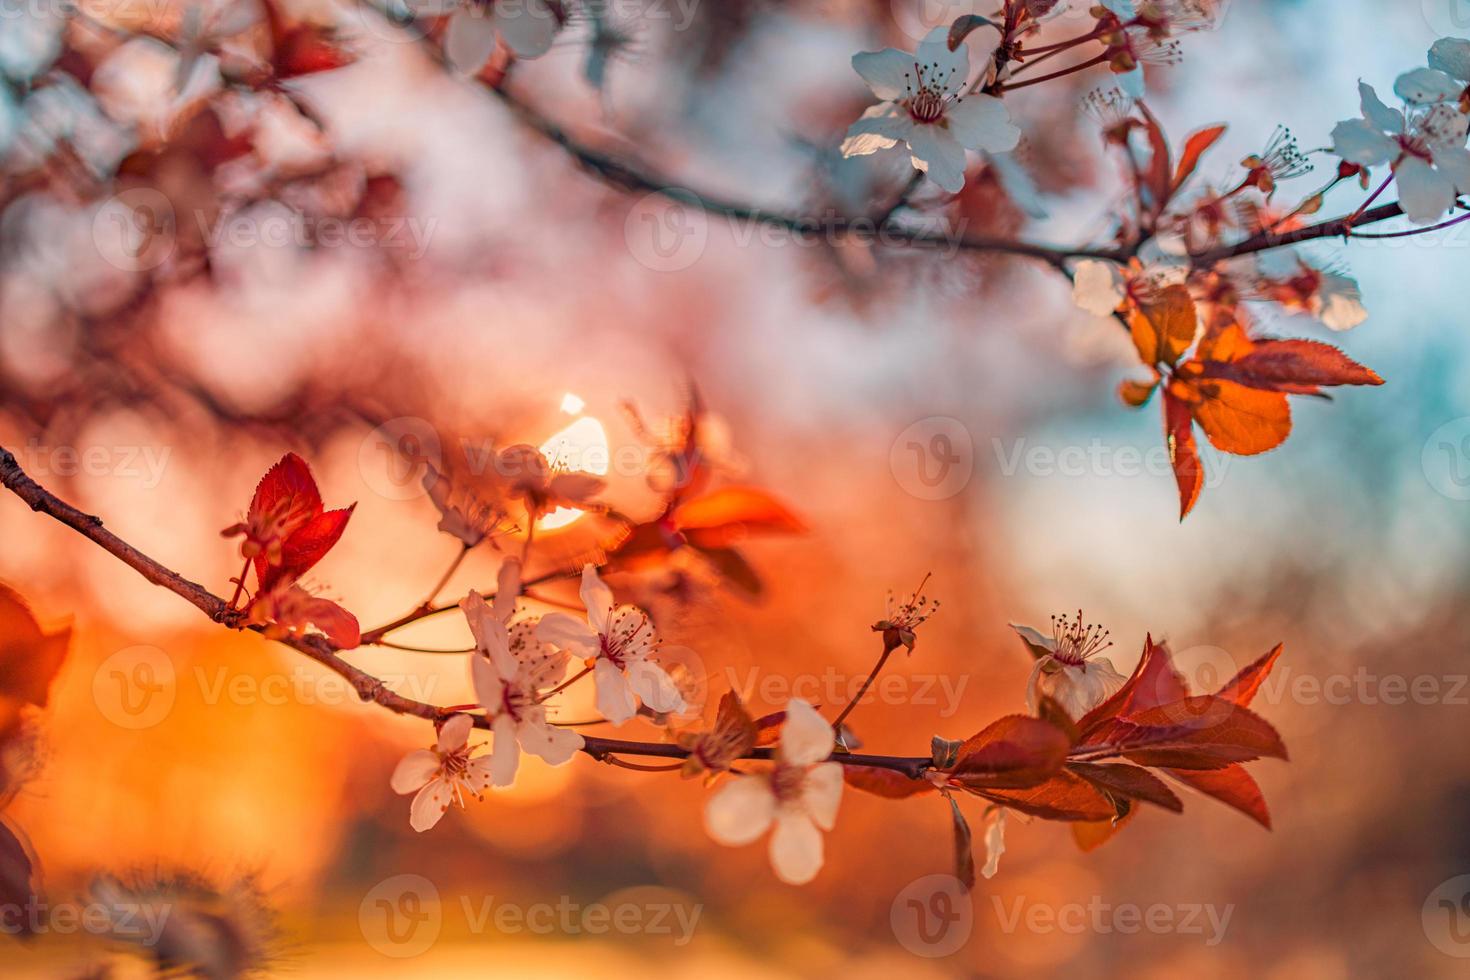 Spring sunset romantic blossoms. Amazing nature scene with blooming tree and sunny view. Sunny day. Spring beauty floral closeup artistic abstract blurred background. Springtime nature photo